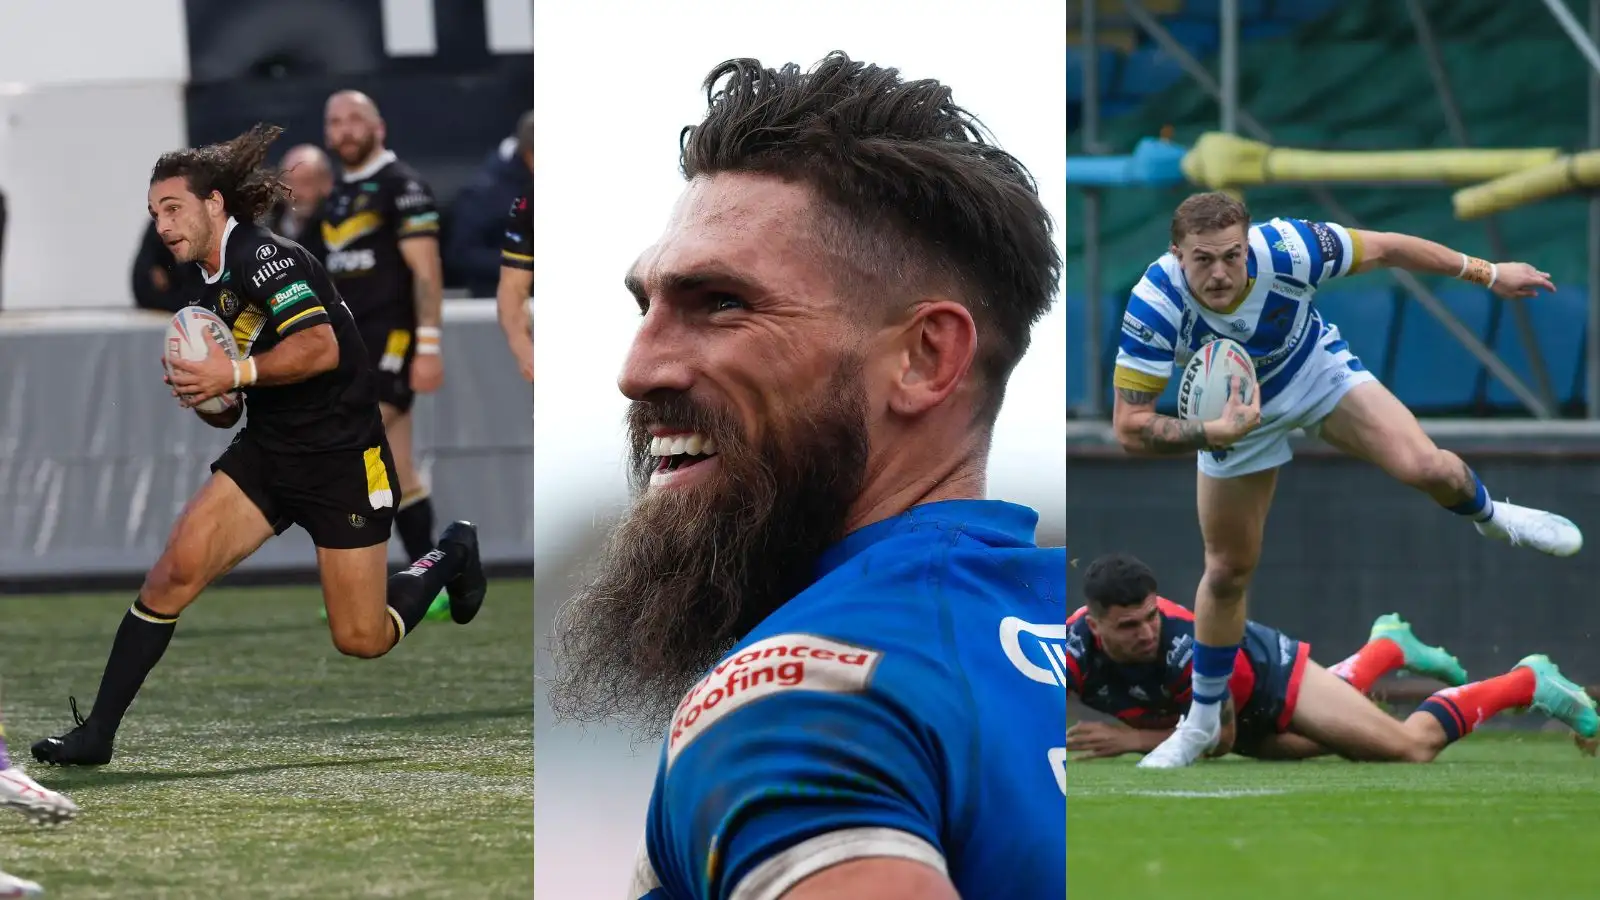 Jarrod Sammut’s whirlwind weekend, Knights charge on as Panthers fall, relegation decided by finest of margins: A crazy final round of Championship action